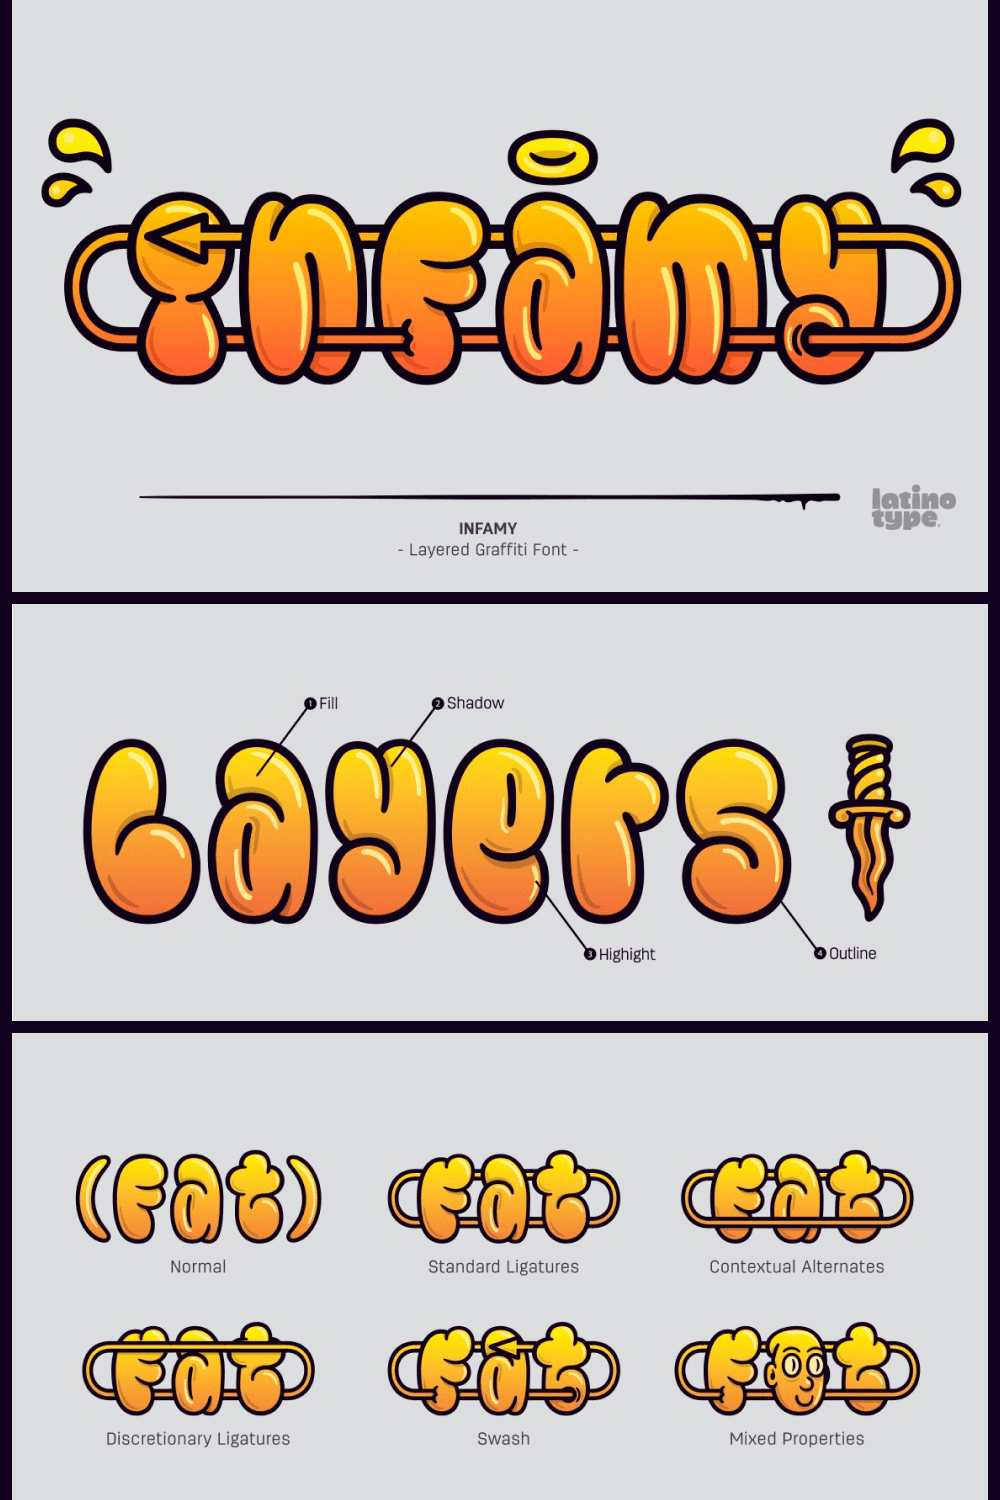 This is a display typeface inspired by graffiti and street art, featuring the ‘bubble letter’ style of writing which was very popular among subway and suburban graffiti artists in the early days of American graffiti.